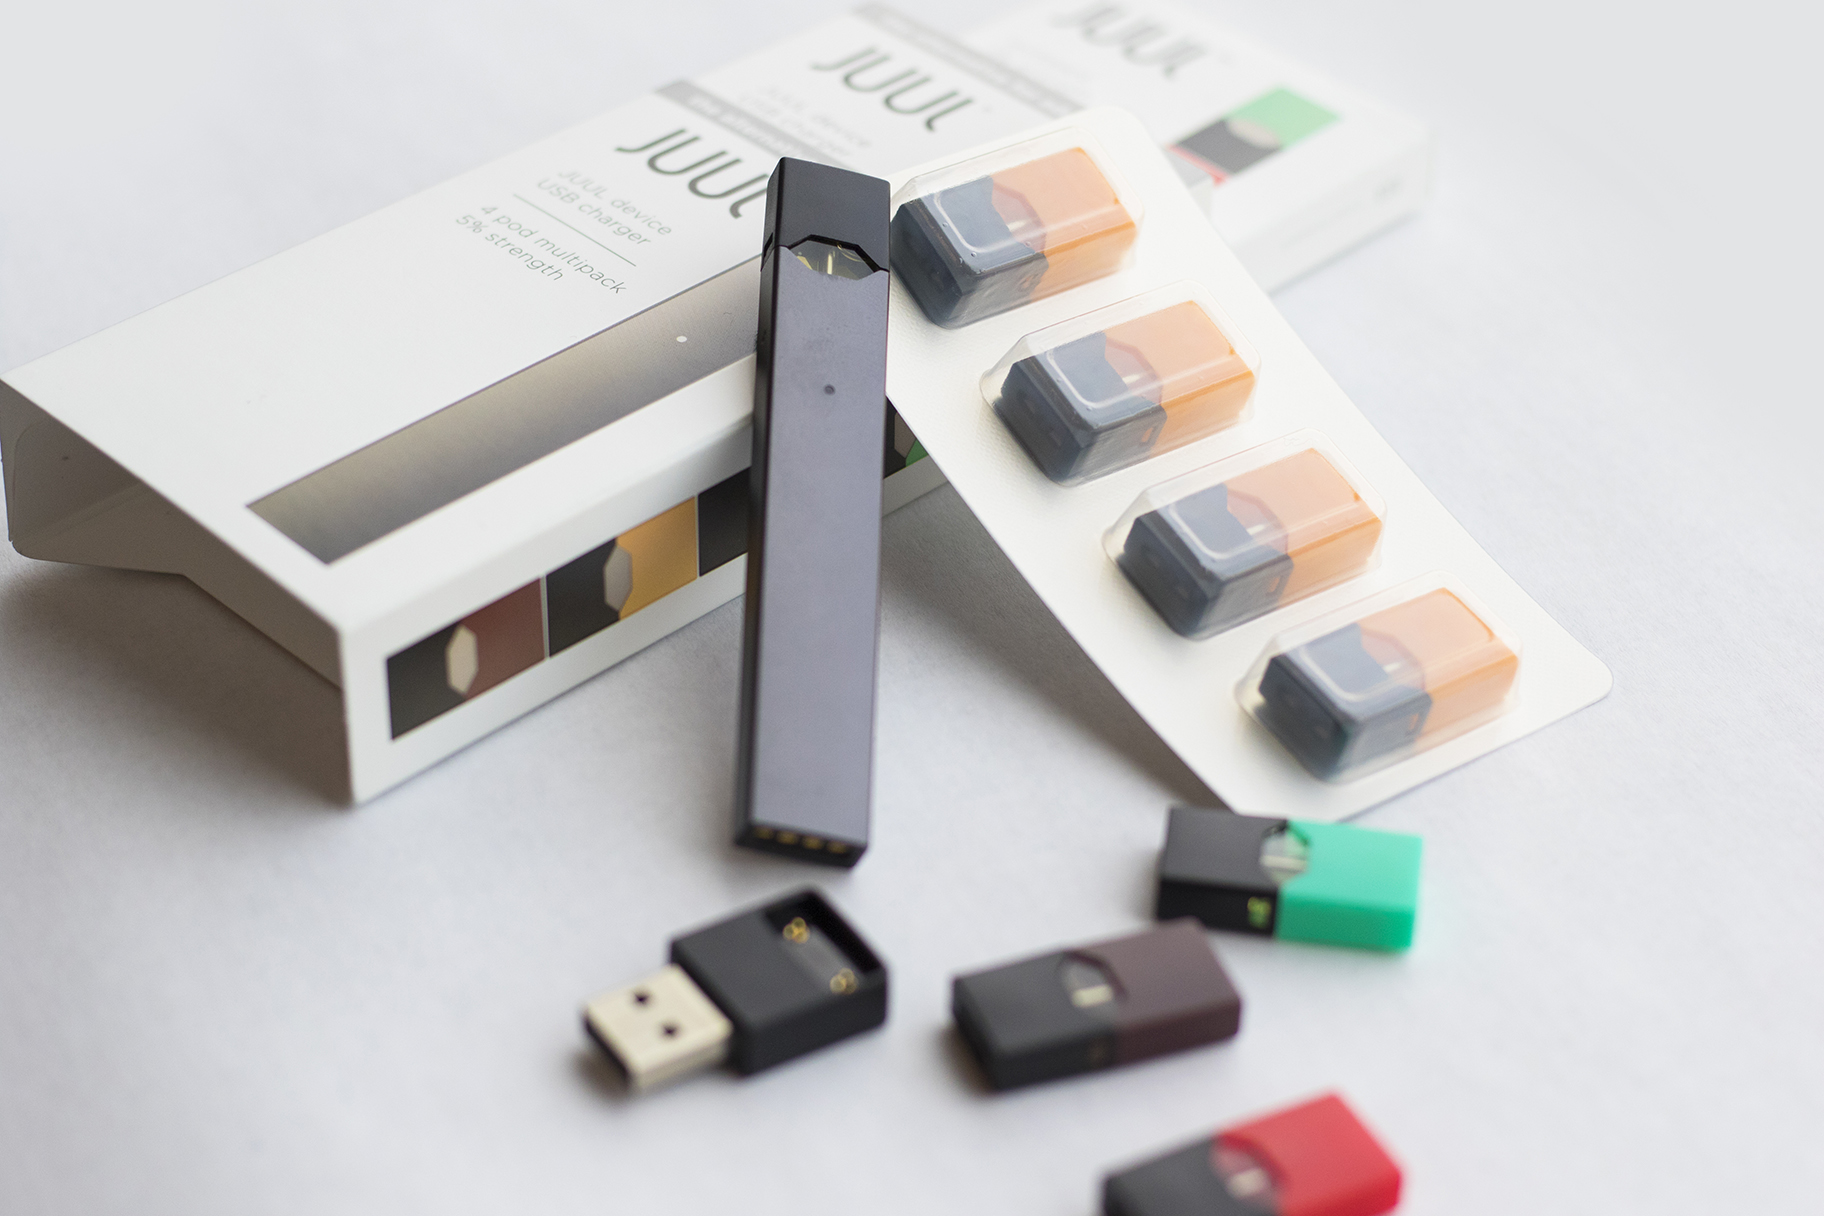 Juul hopes Bluetooth age verification will curb underage vaping